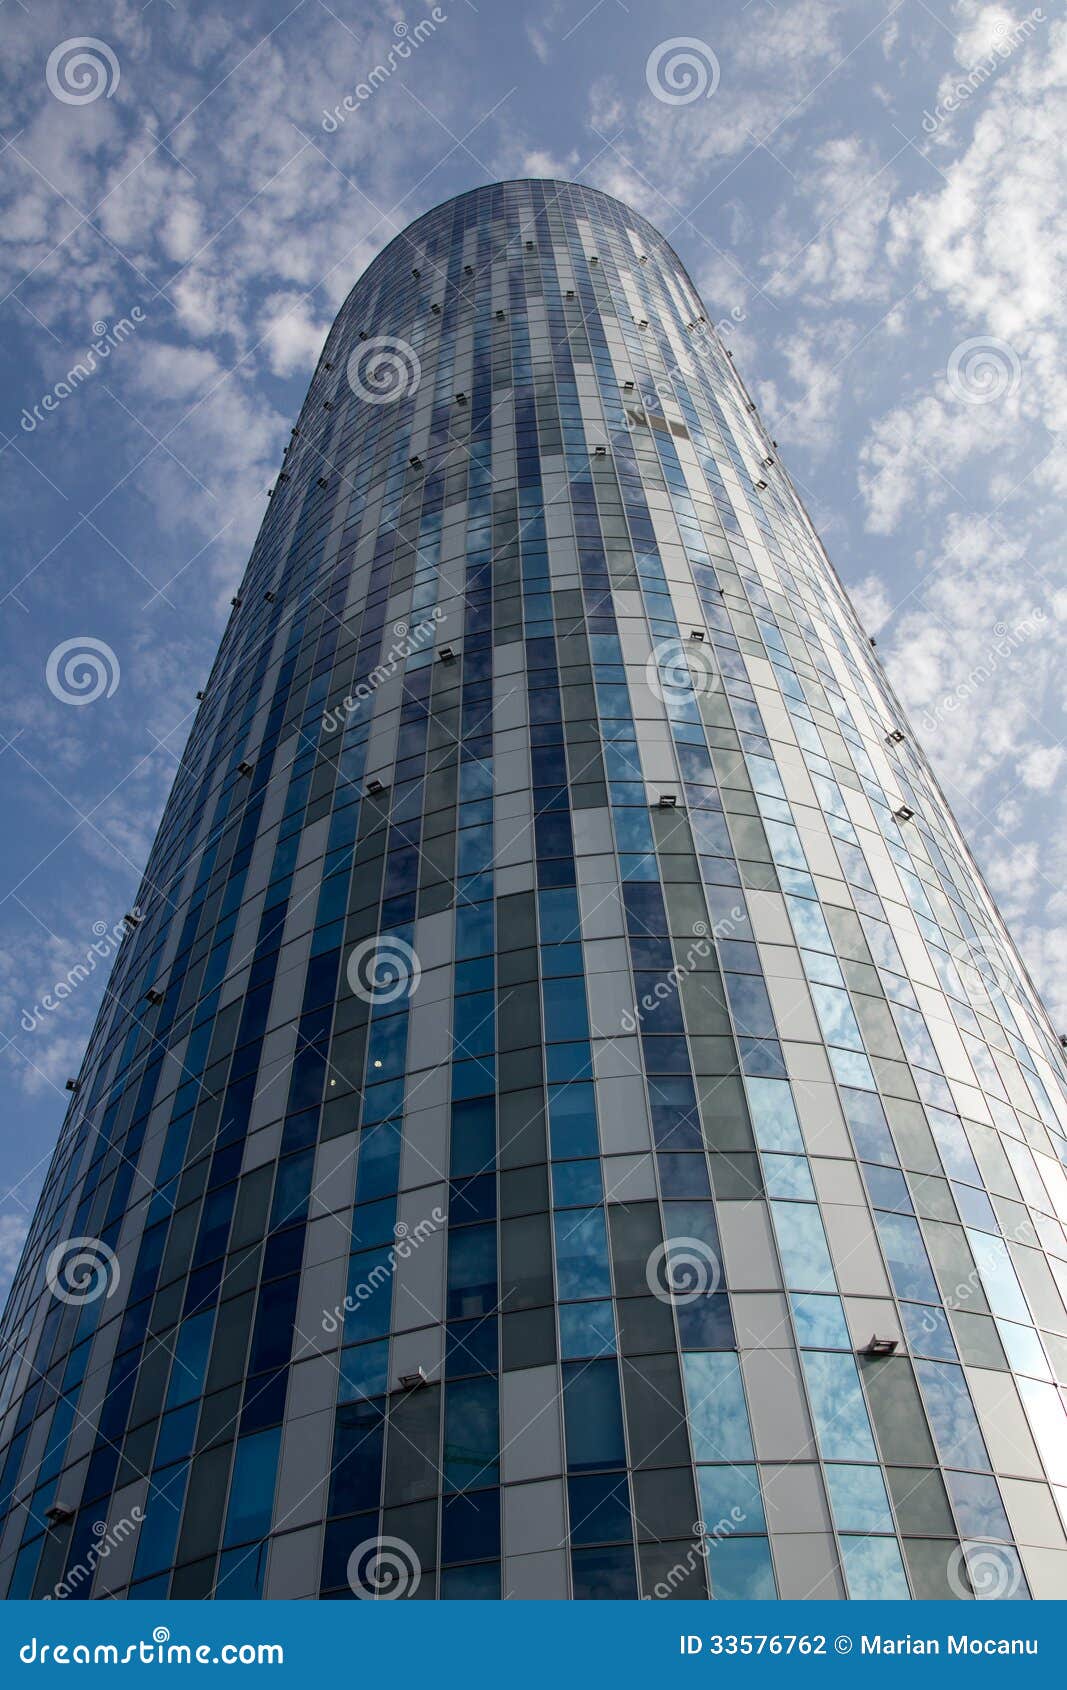 A tower of a new office building with blue sky and clouds